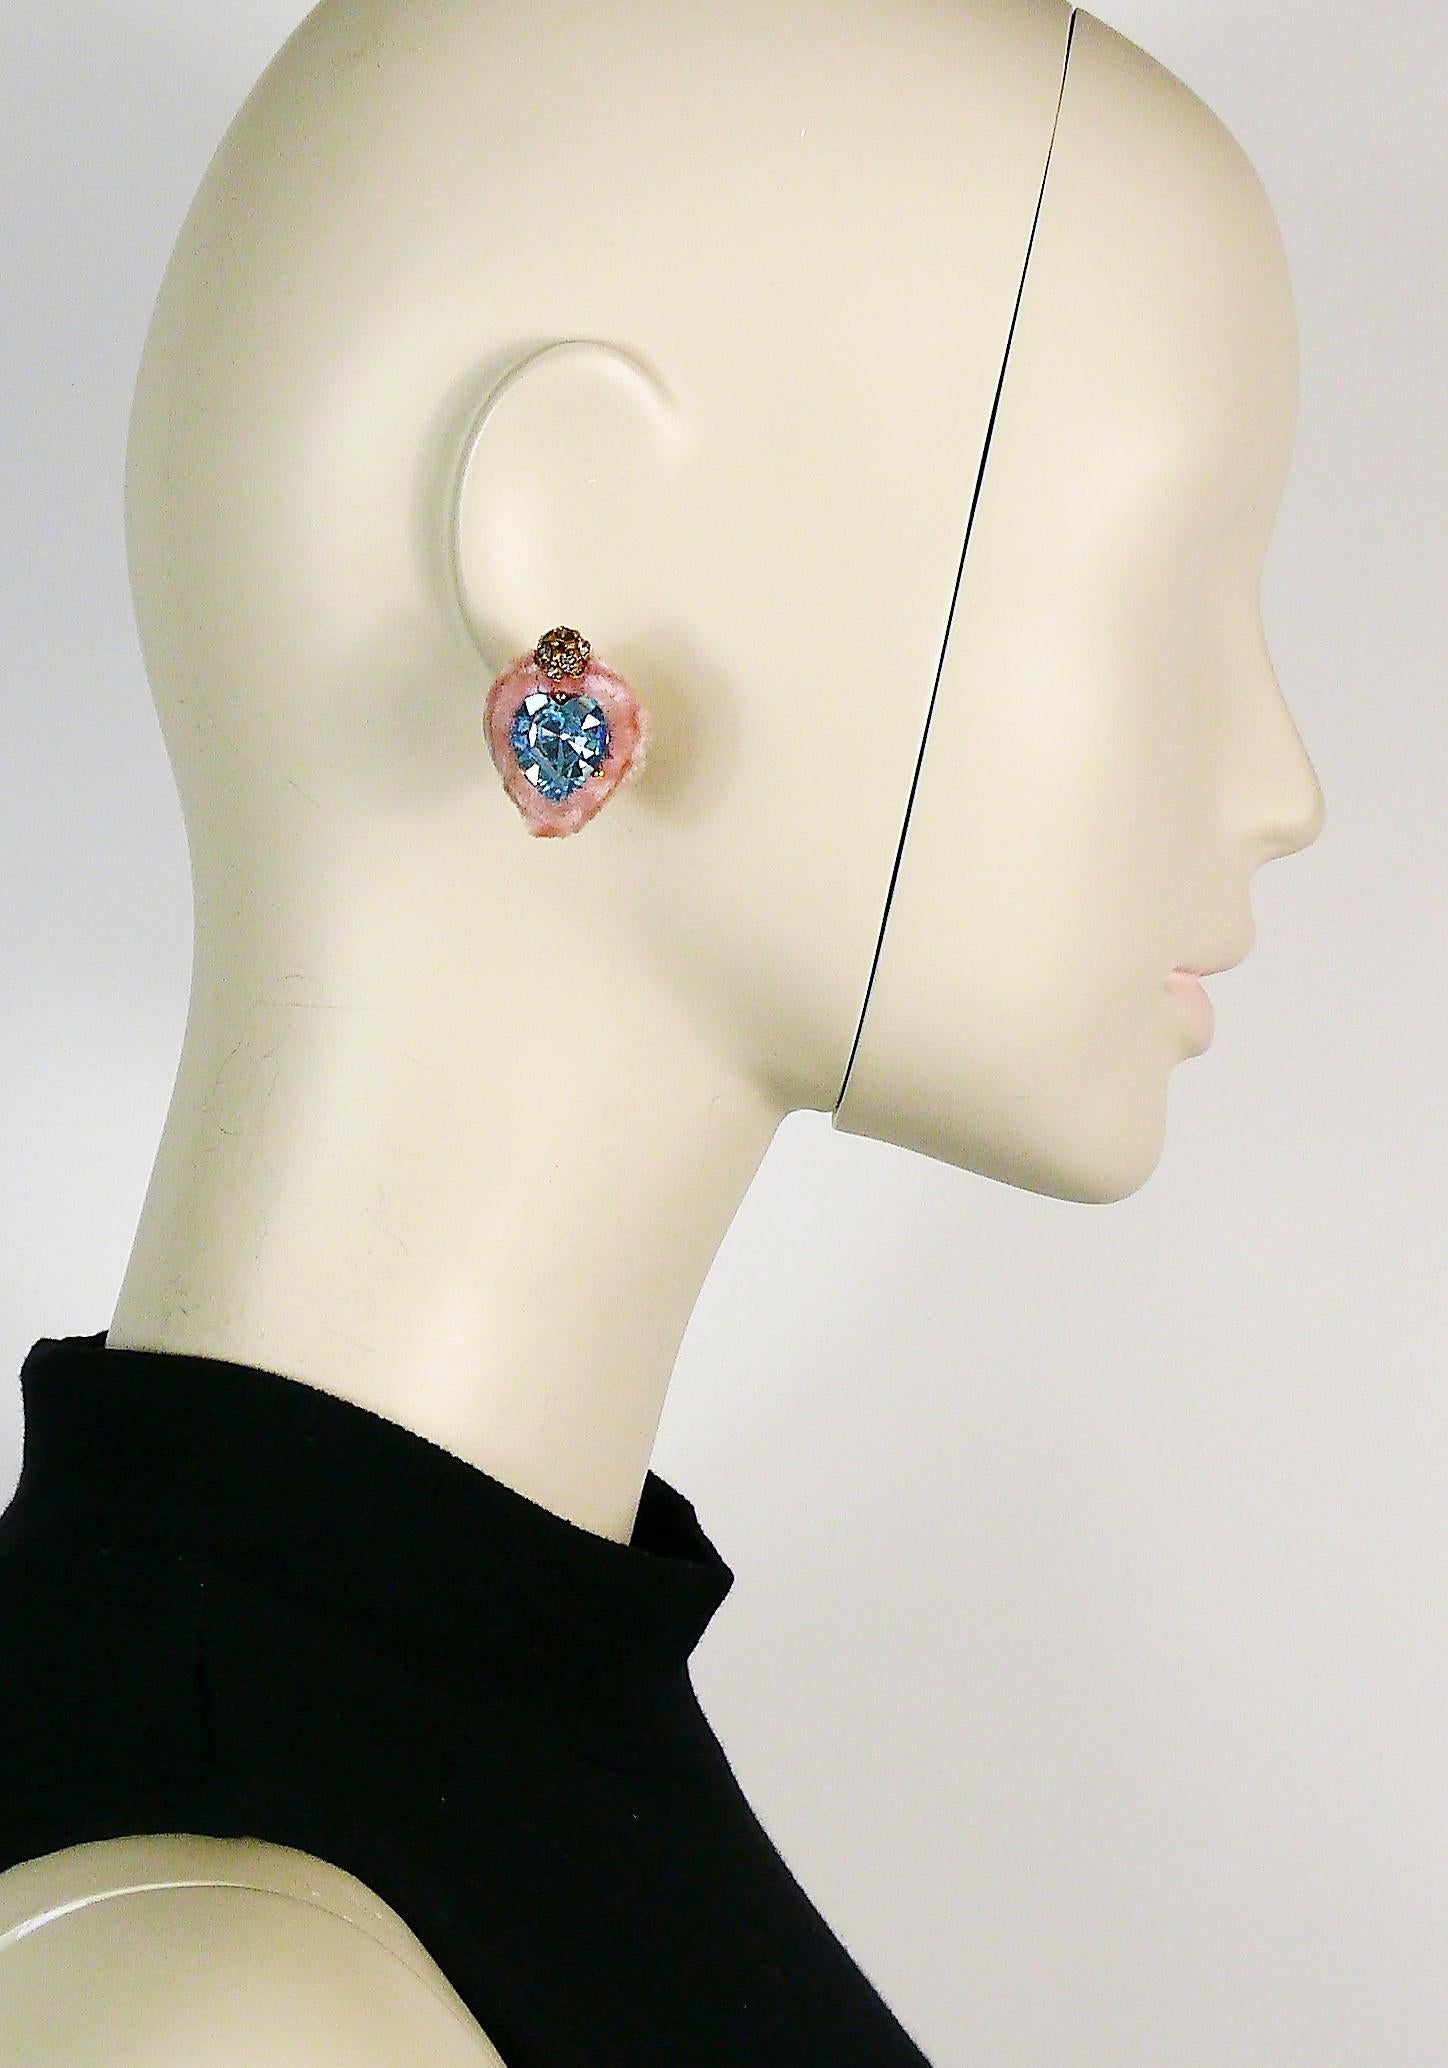 CHRISTIAN LACROIX vintage gold tone heart-shaped clip-on earrings embellished with pink faux fur, clear crystal ball and a large blue heart crystal at center.

Marked CHRISTIAN LACROIX CL Made in France.

Indicative measurements : max. height